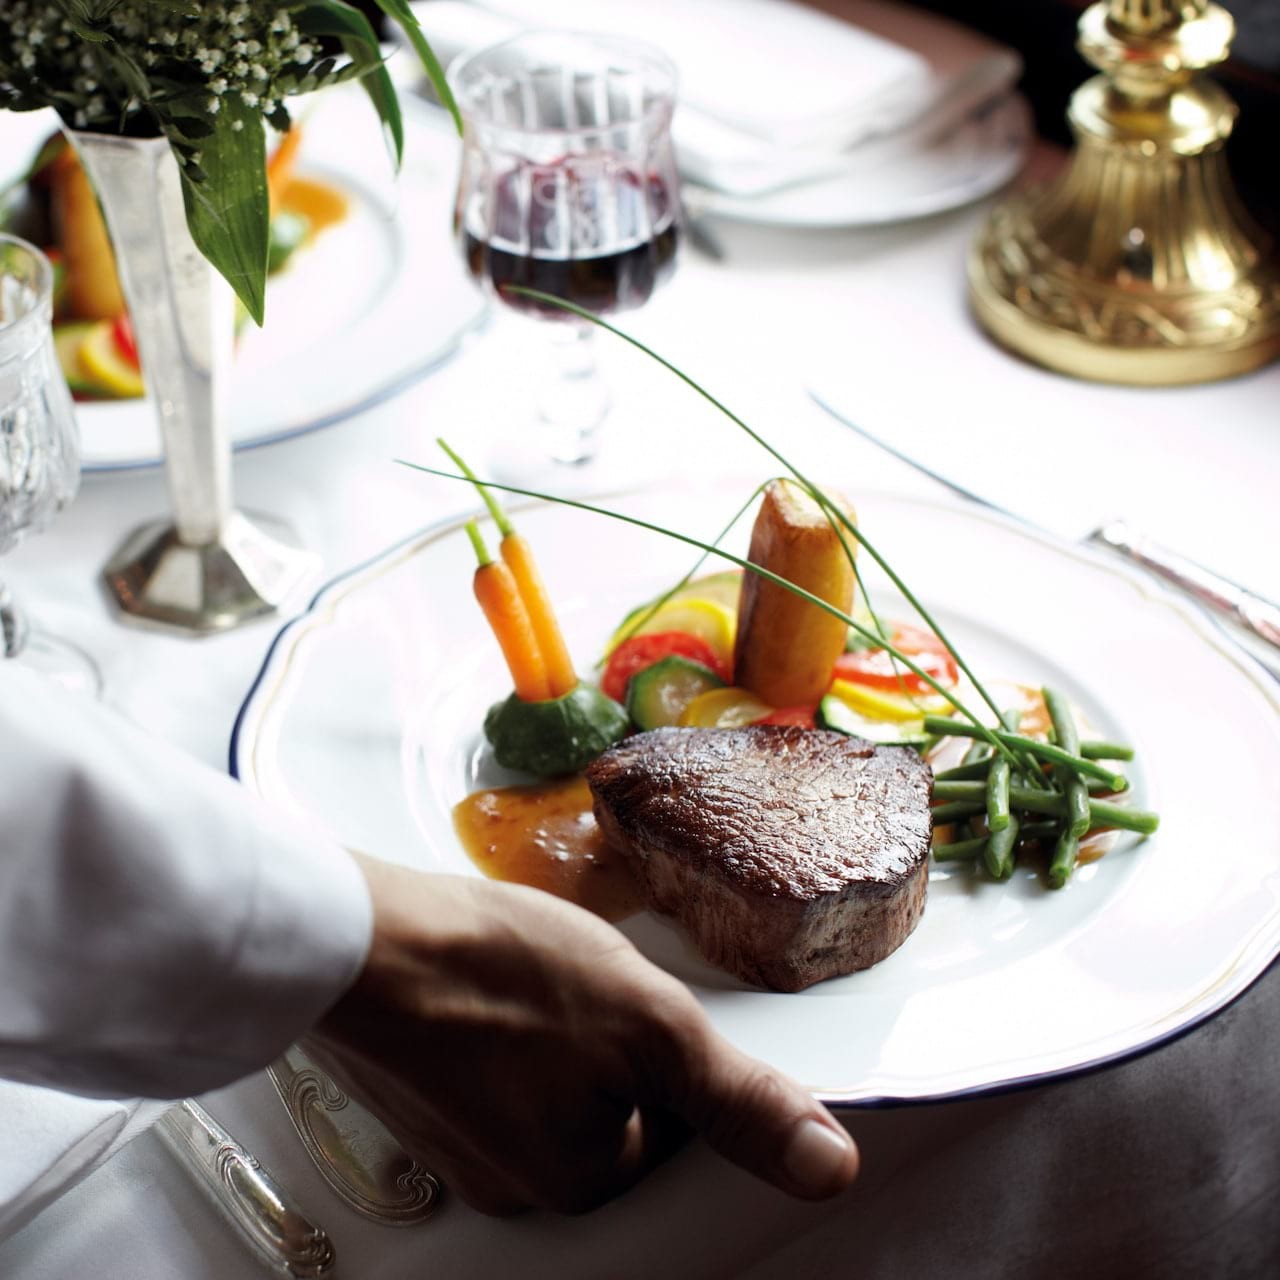 Dinner: The highlight of the culinary experience on the Venice Simplon-Orient-Express is the sumptuous dinner served in the elegant dining cars. The dinner is a multi-course affair, featuring gourmet creations that showcase the expertise of the onboard chefs.